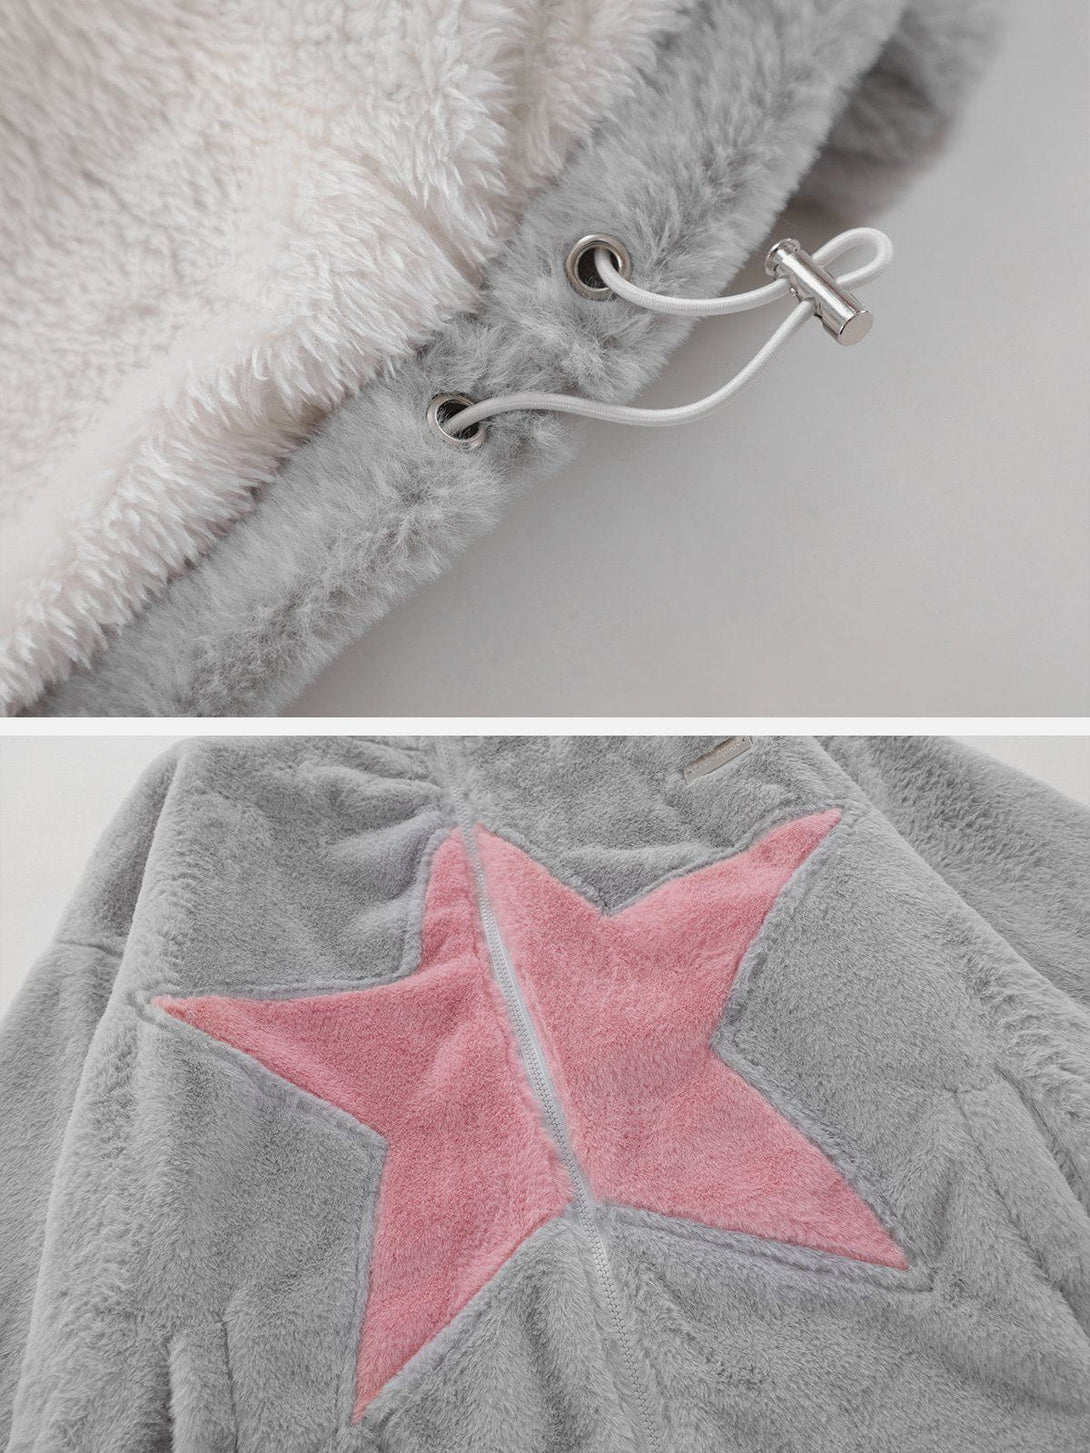 Majesda® - Star Patchwork Winter Coat outfit ideas streetwear fashion